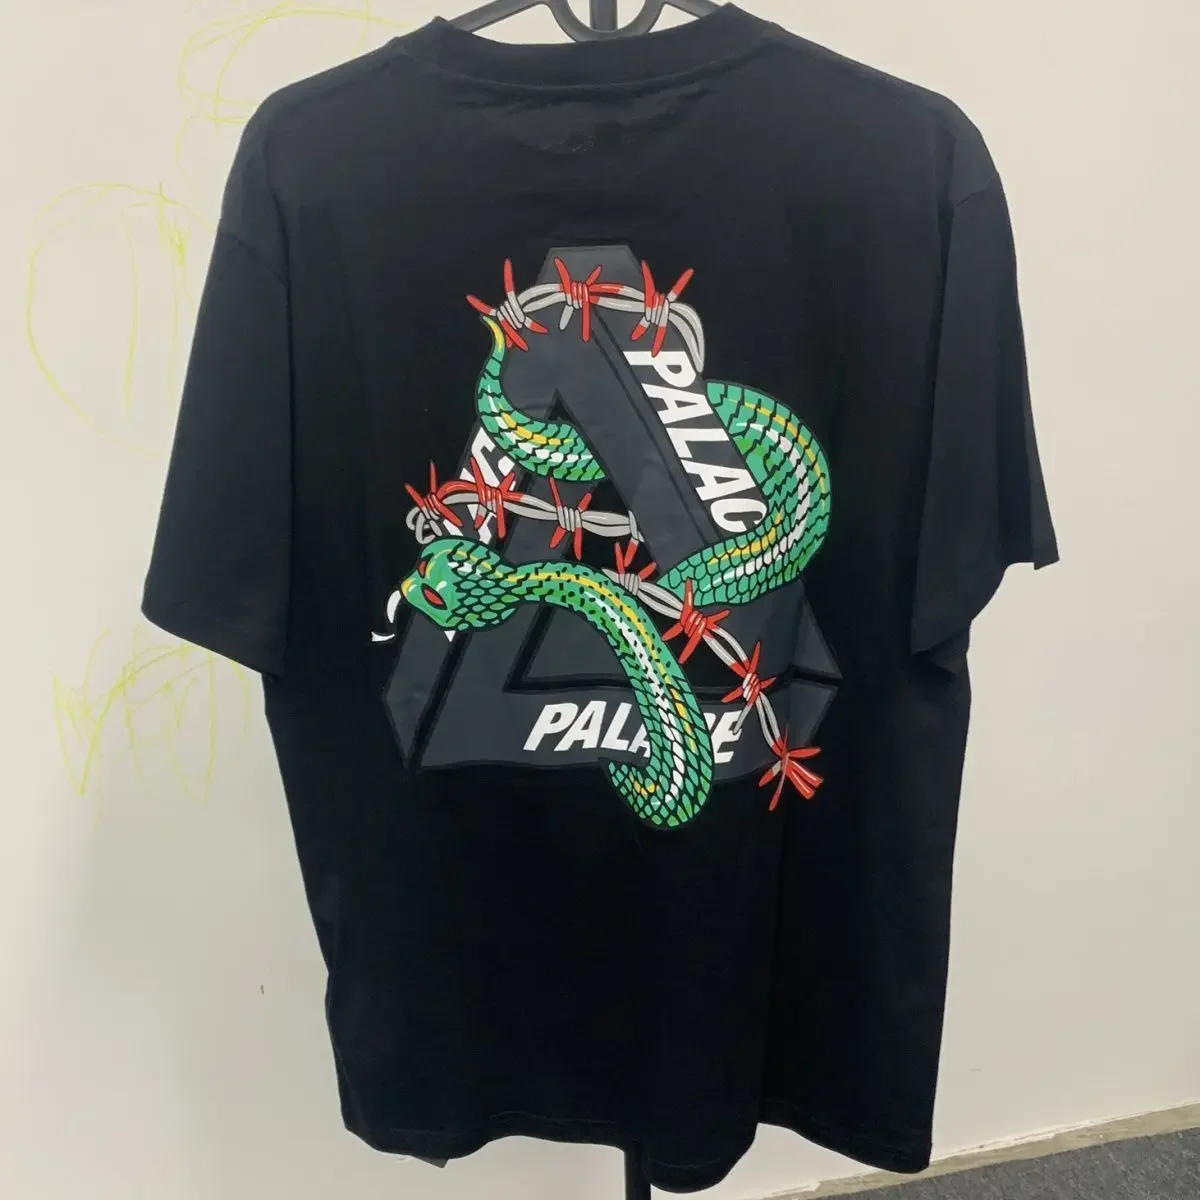 

Summer fashion brand Palace short-sleeved T-shirt loose triangle cobra hip-hop style loose casual street tops for men and women